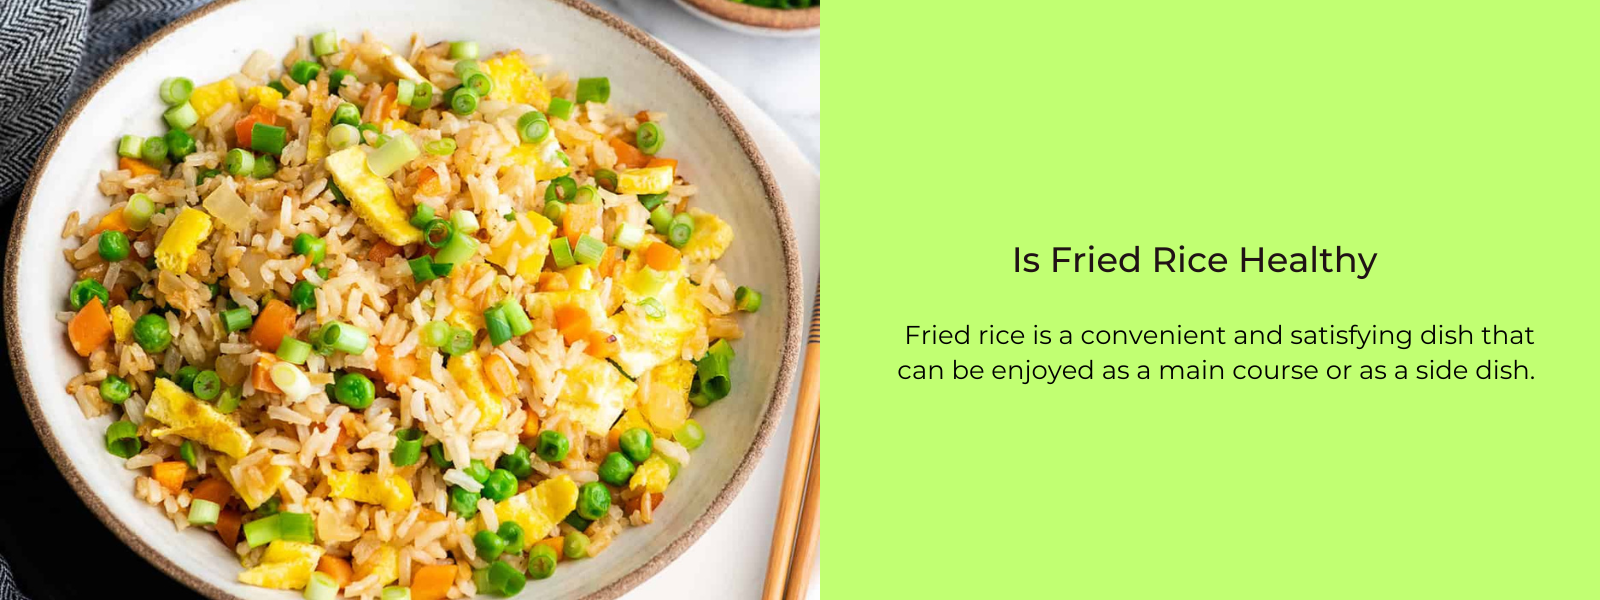 Is Fried Rice Healthy